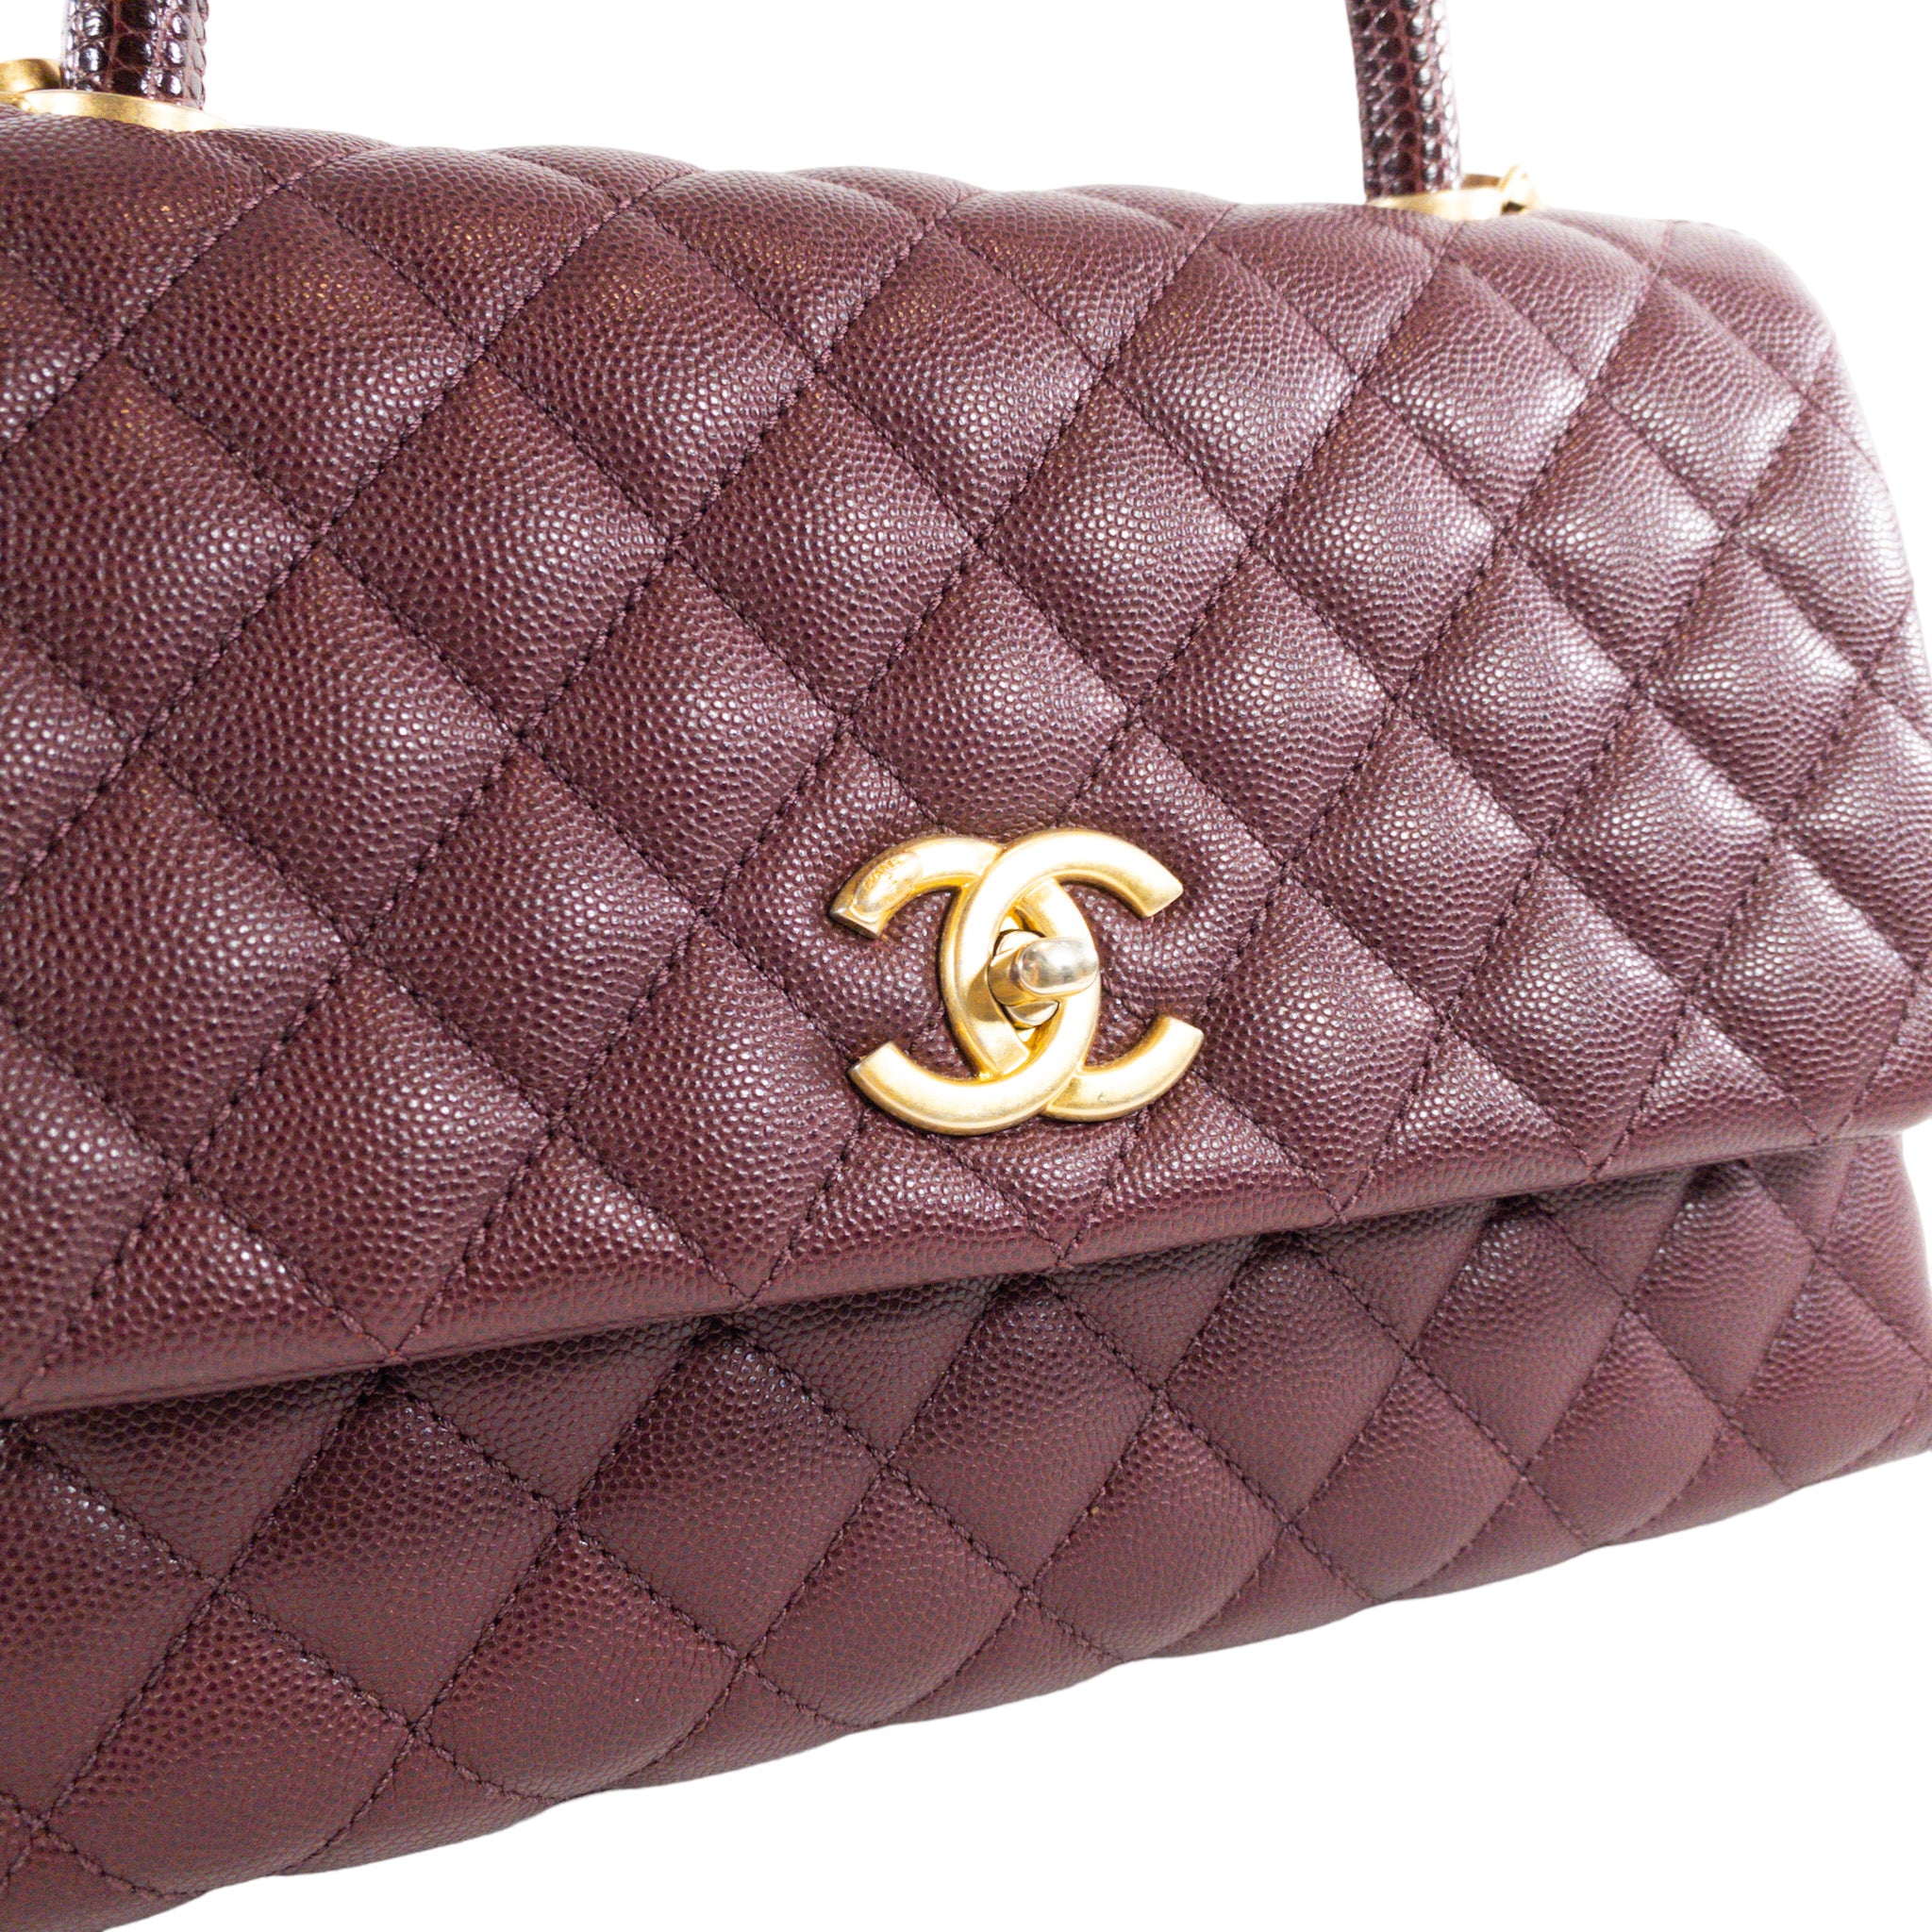 red coco handle chanel bag